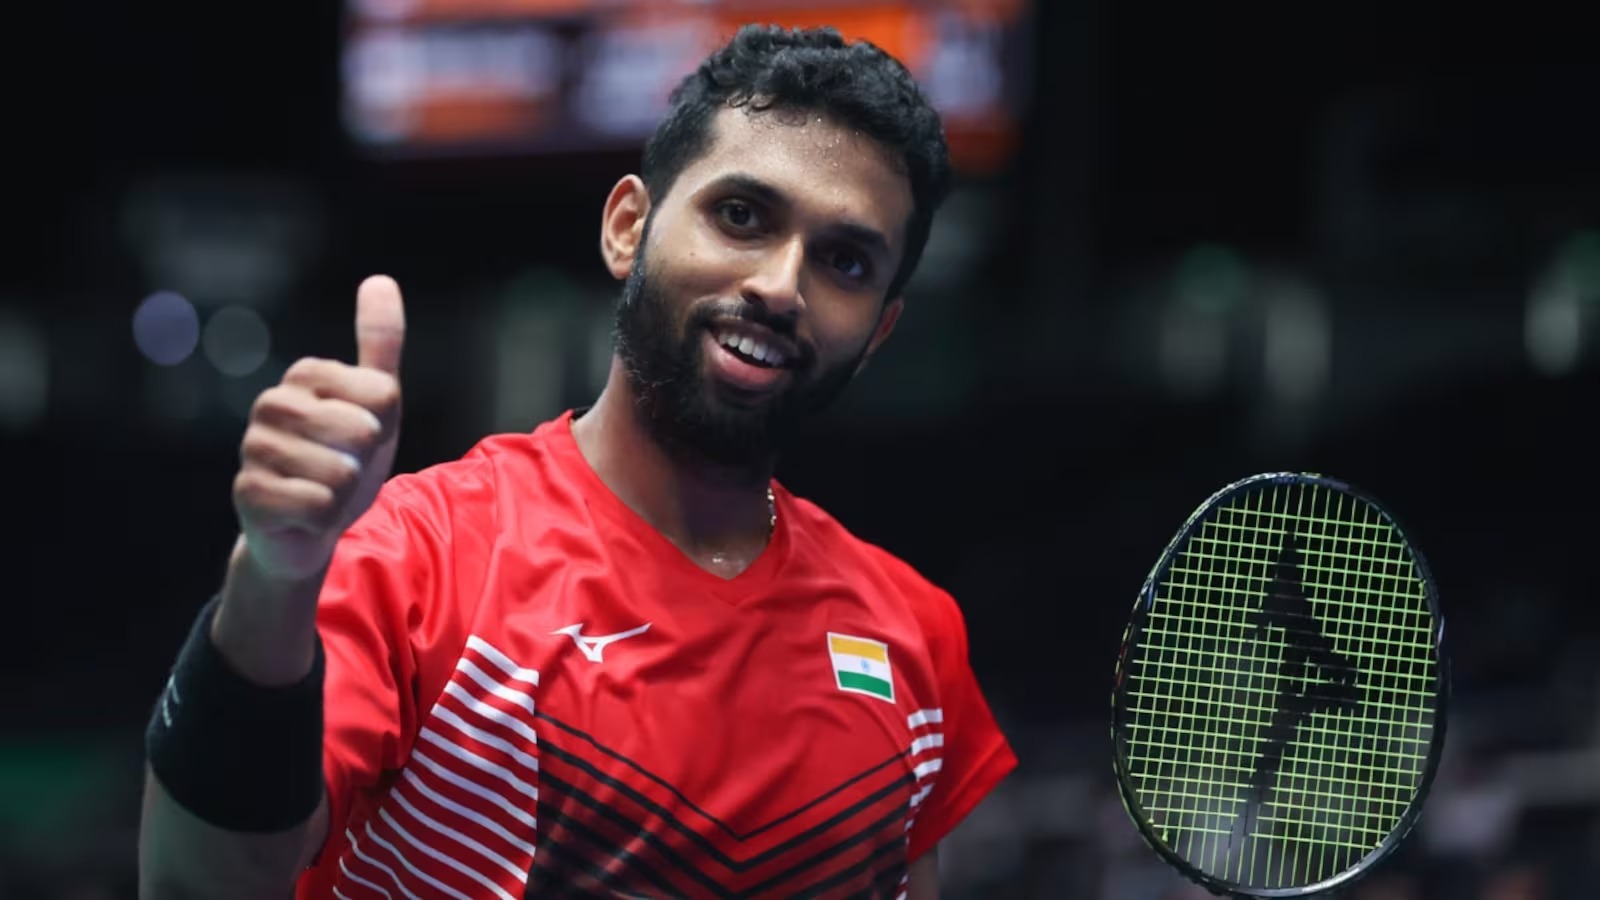 HS Prannoy not thinking about Olympics, says breaking into 'Top-three' is the target now